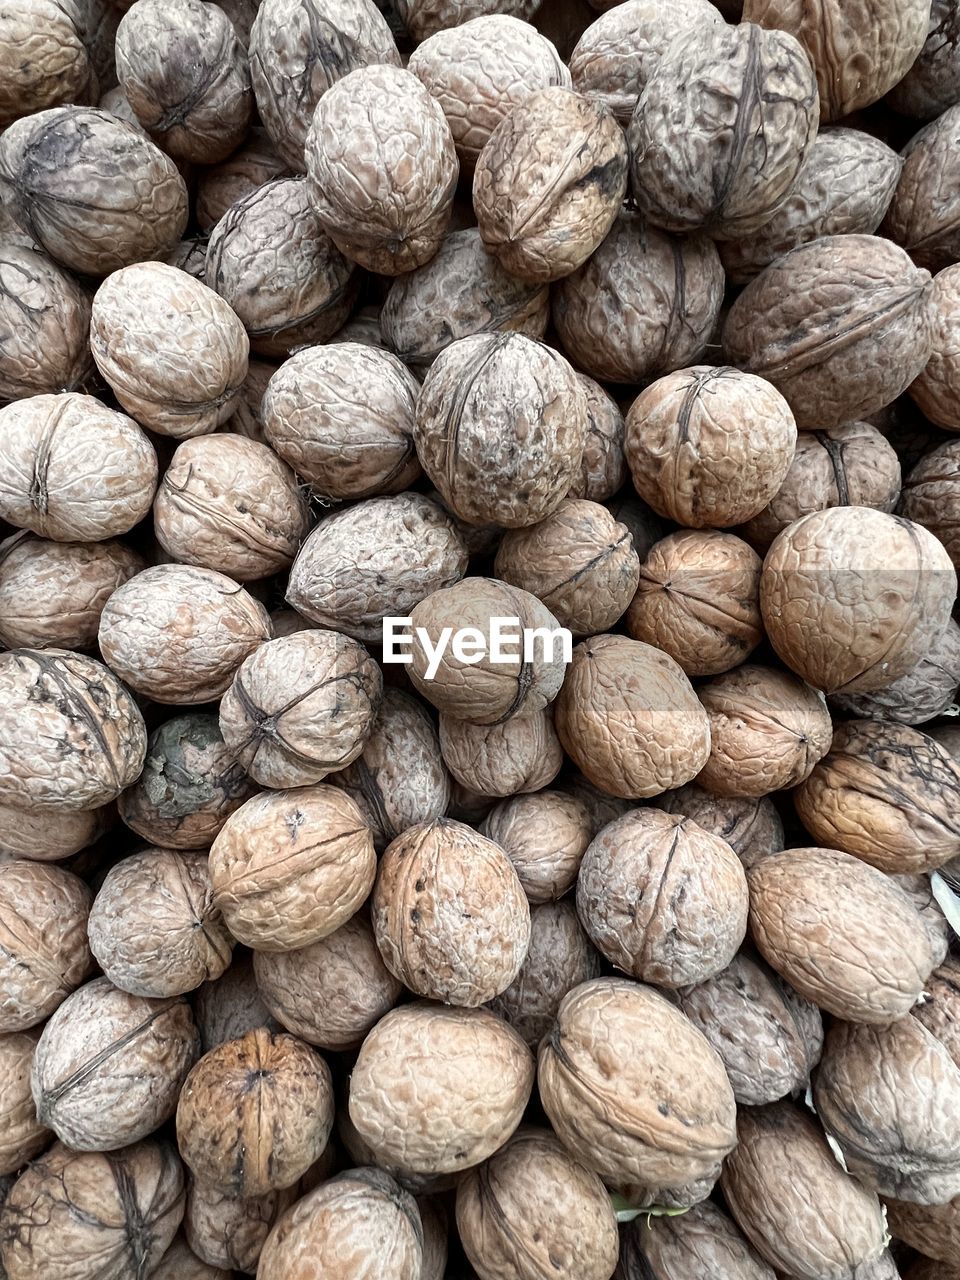 large group of objects, food and drink, food, backgrounds, full frame, freshness, abundance, no people, wellbeing, still life, healthy eating, produce, close-up, nut - food, brown, nut, textured, nuts & seeds, walnut